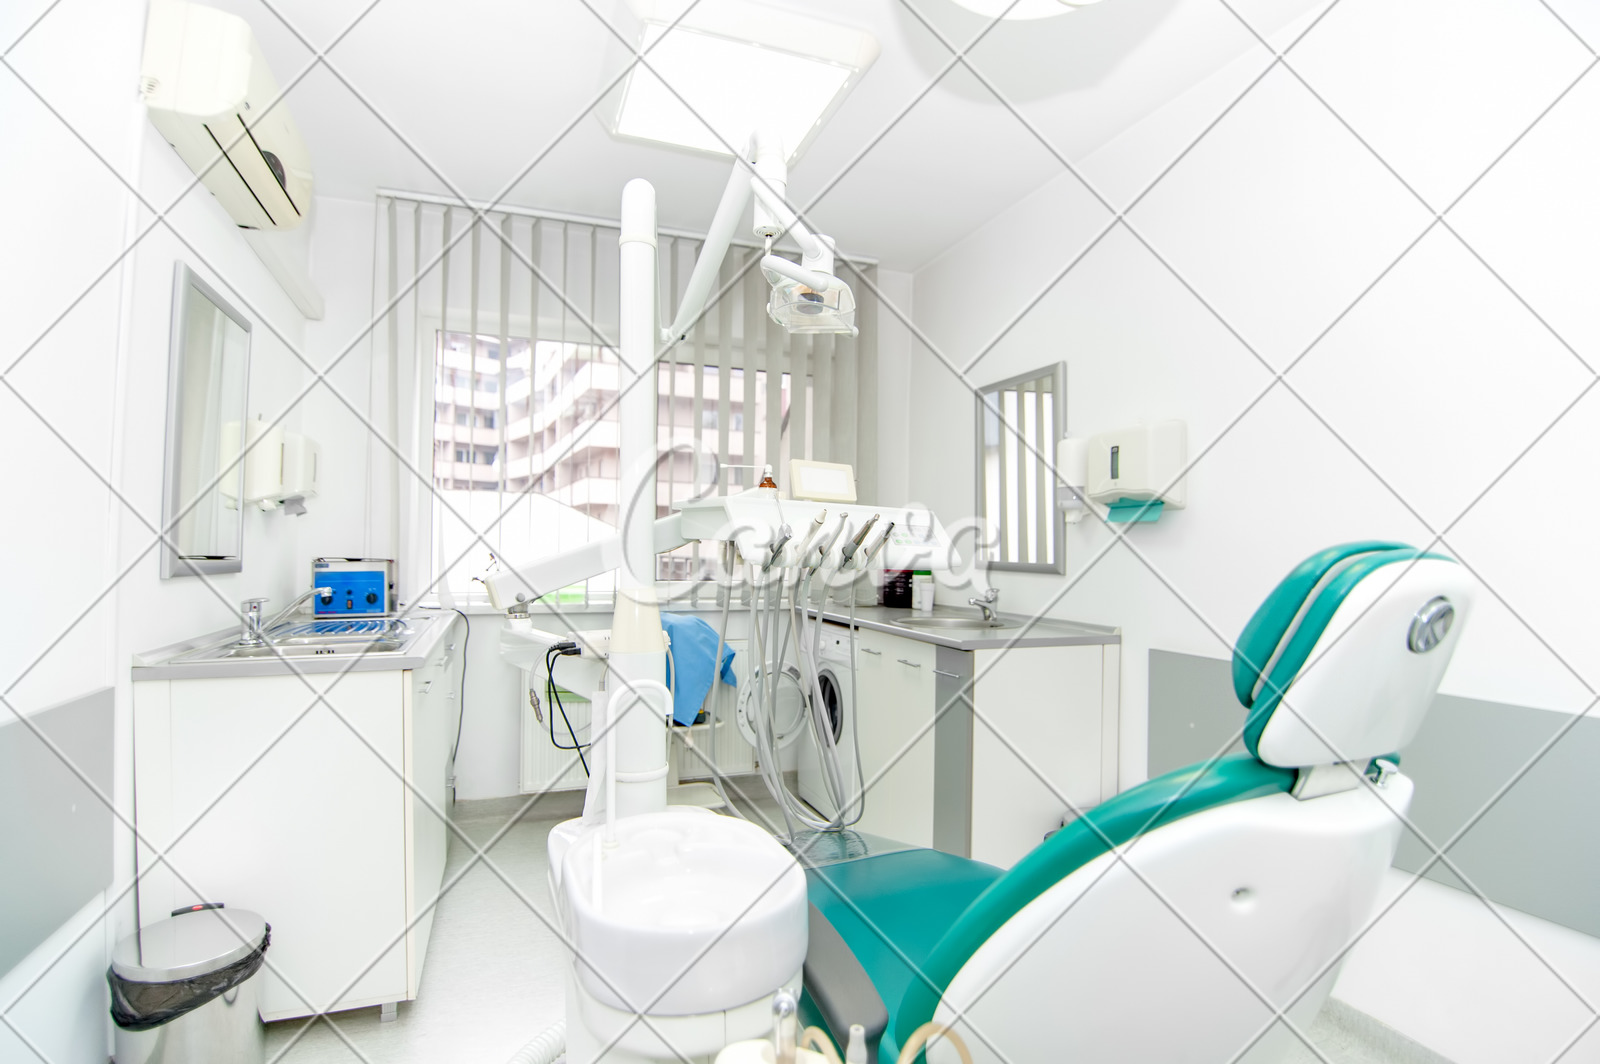 Dental Clinic Interior Design With Working Tools And